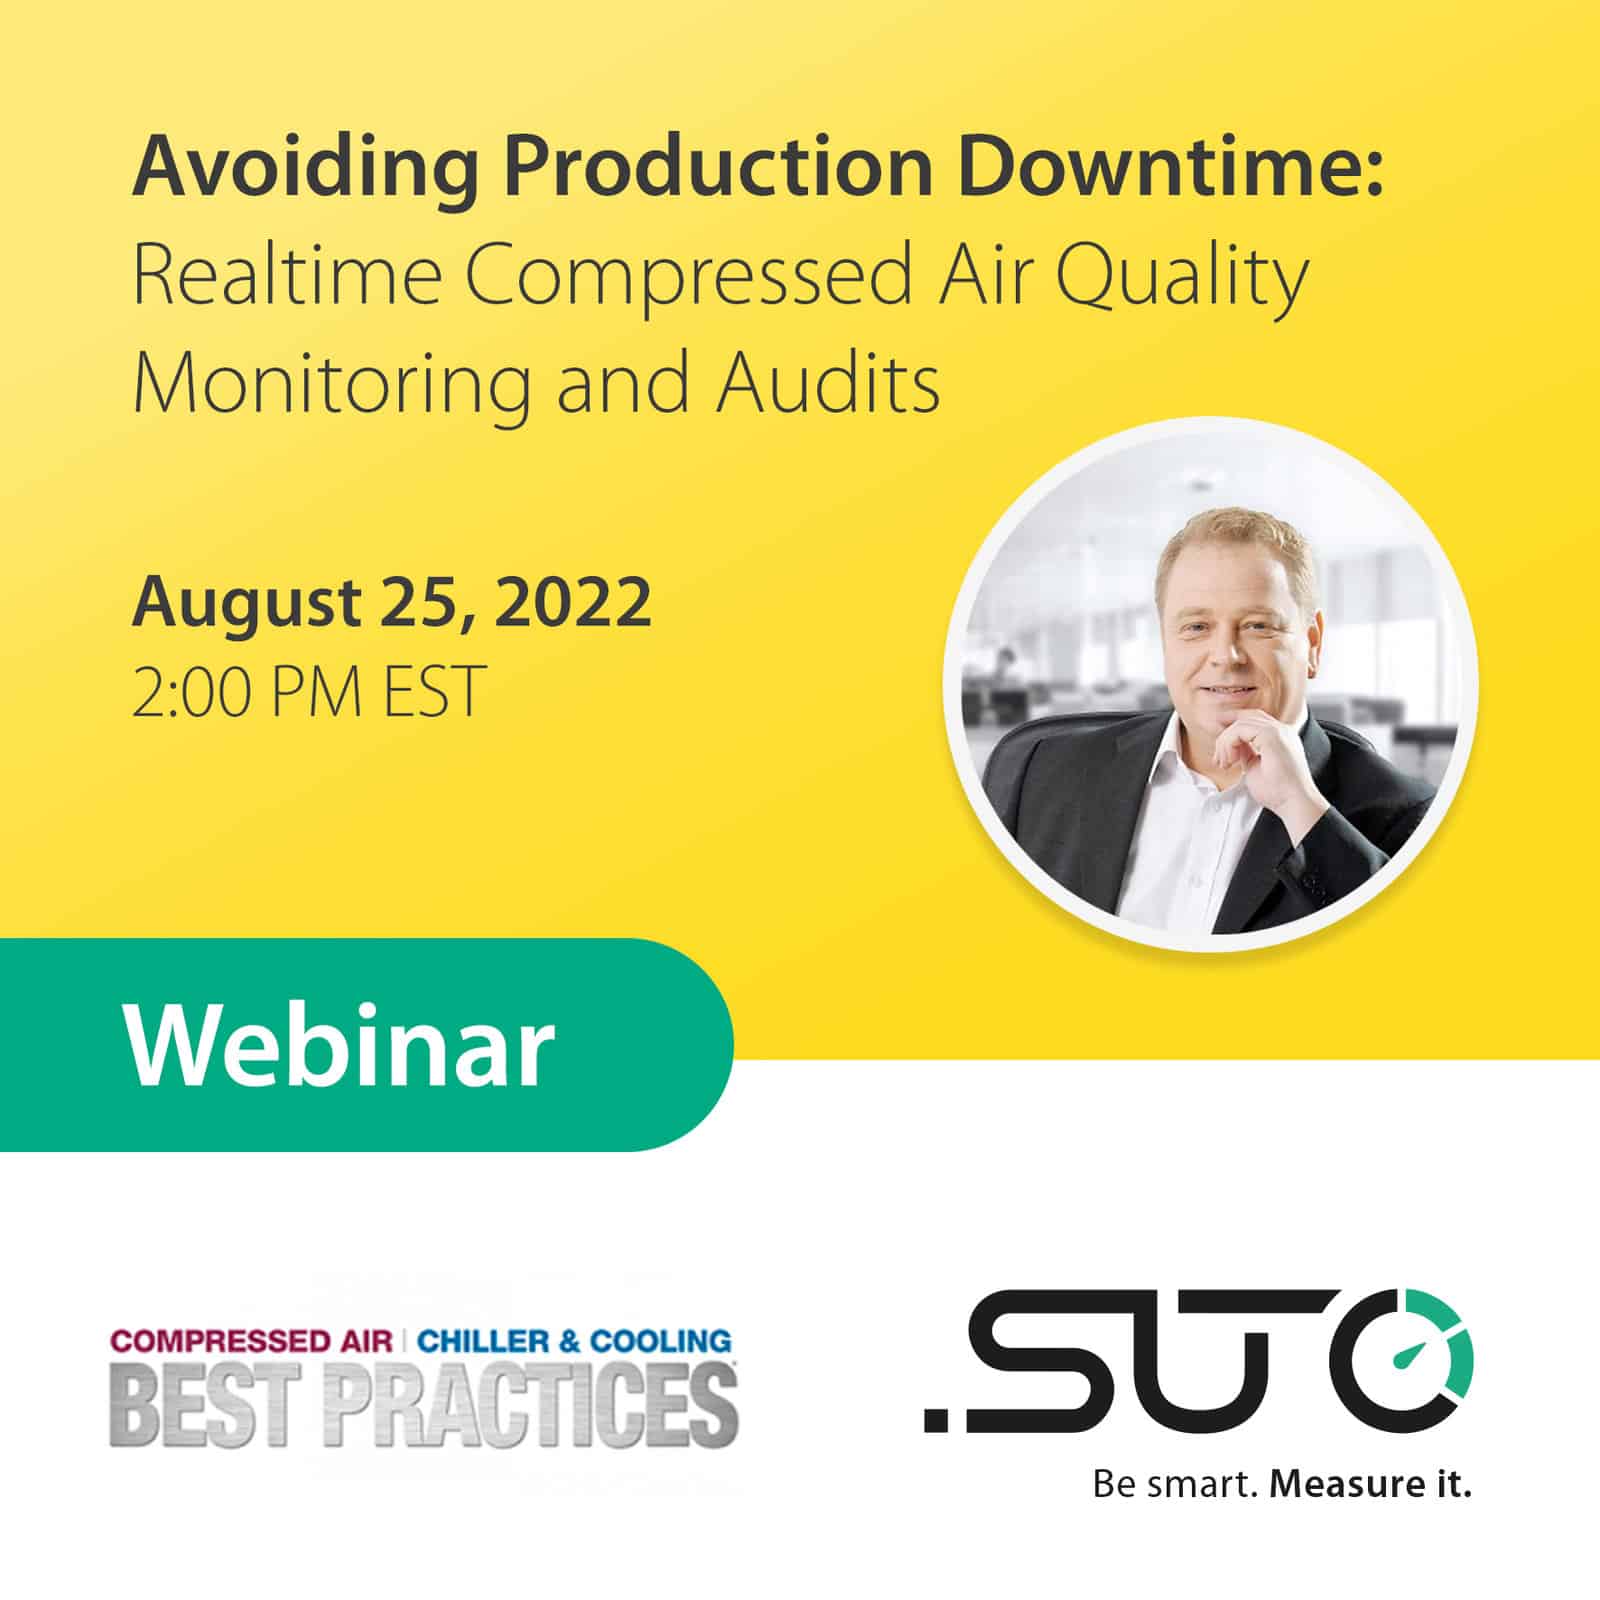 SUTO-Upcoming_Webinar_Avoiding_Production_Downtime_with_CABP_magazine_on_August_25th_2022_-_0